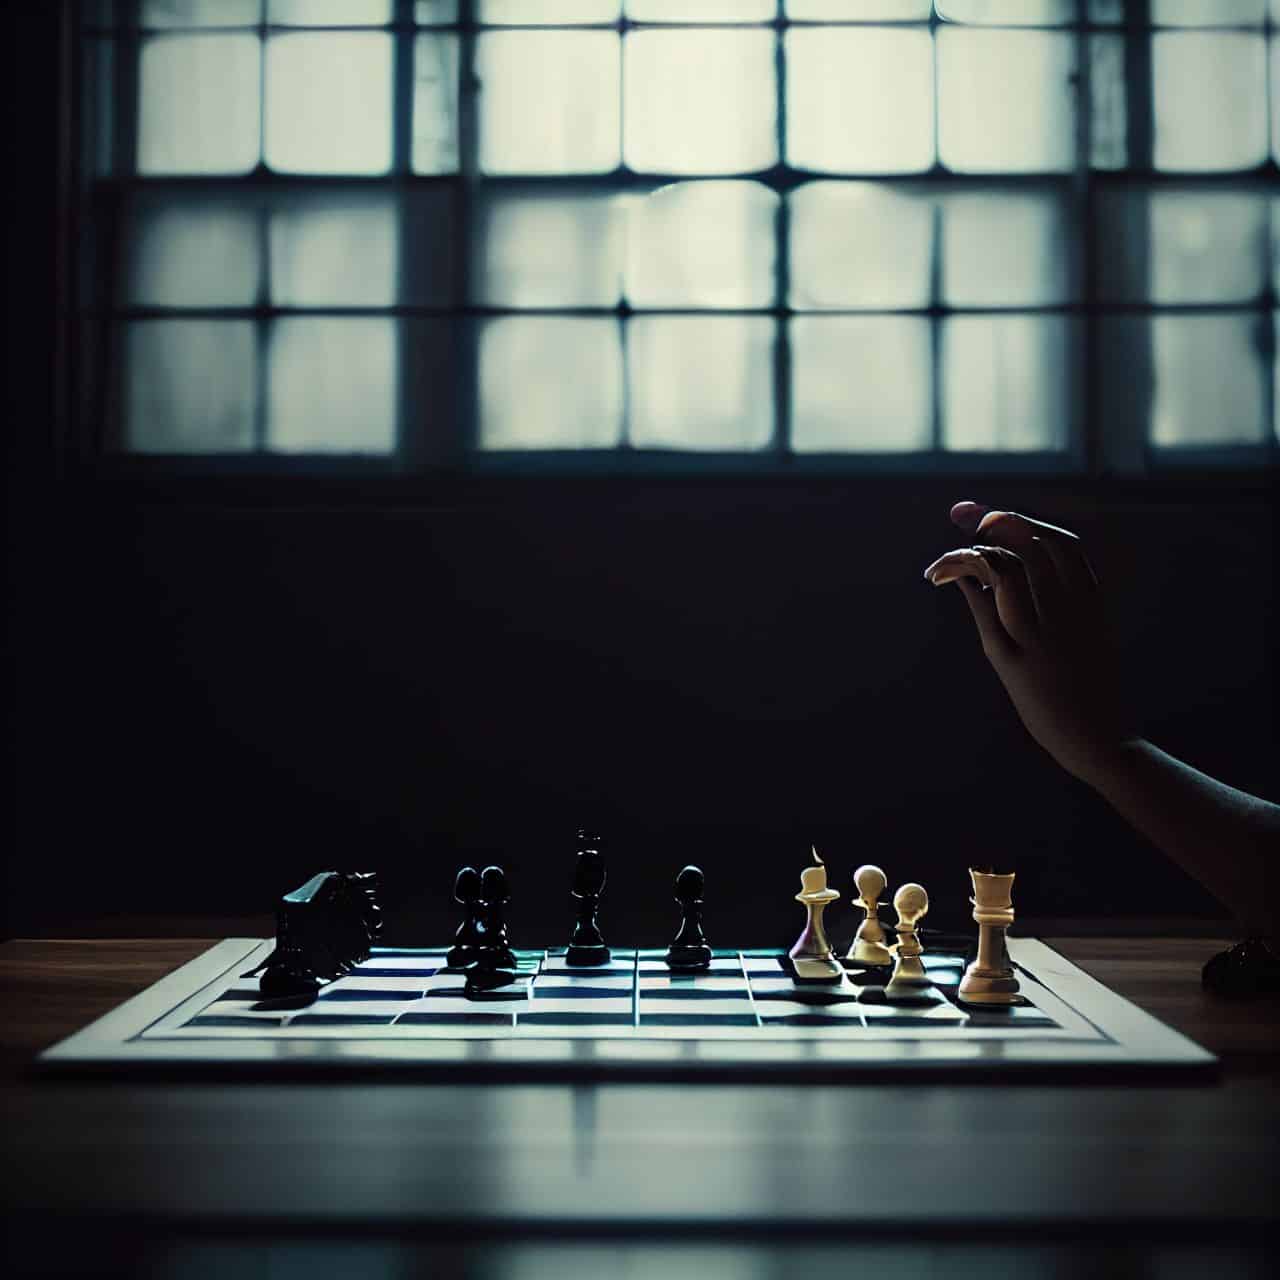 Solo Chess or How to Play It Alone: Guide for Playing by Yourself